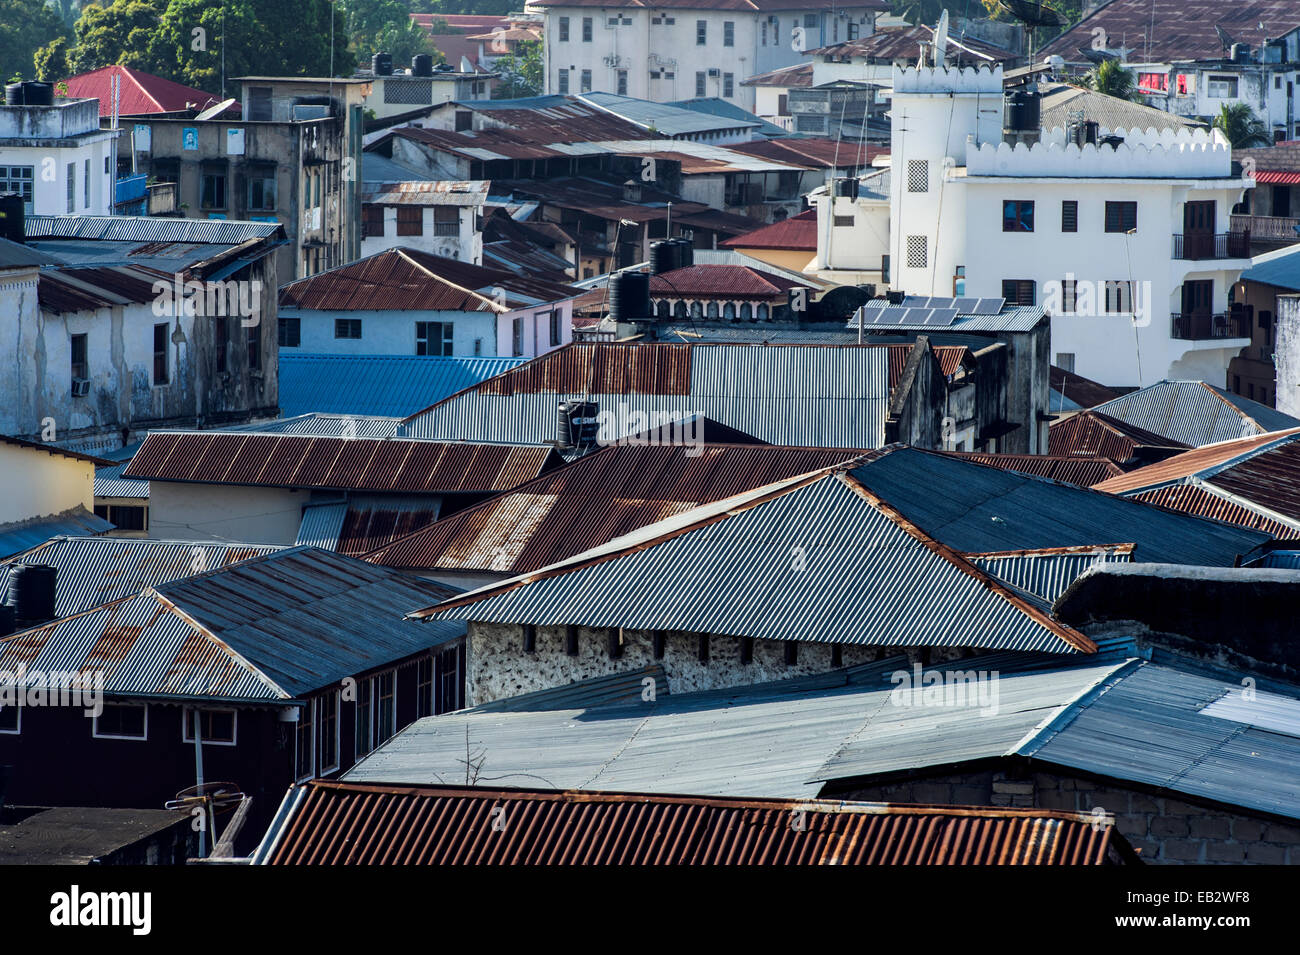 Rusting corrugated tin roofs crowded together in an ancient trading port. Stock Photo